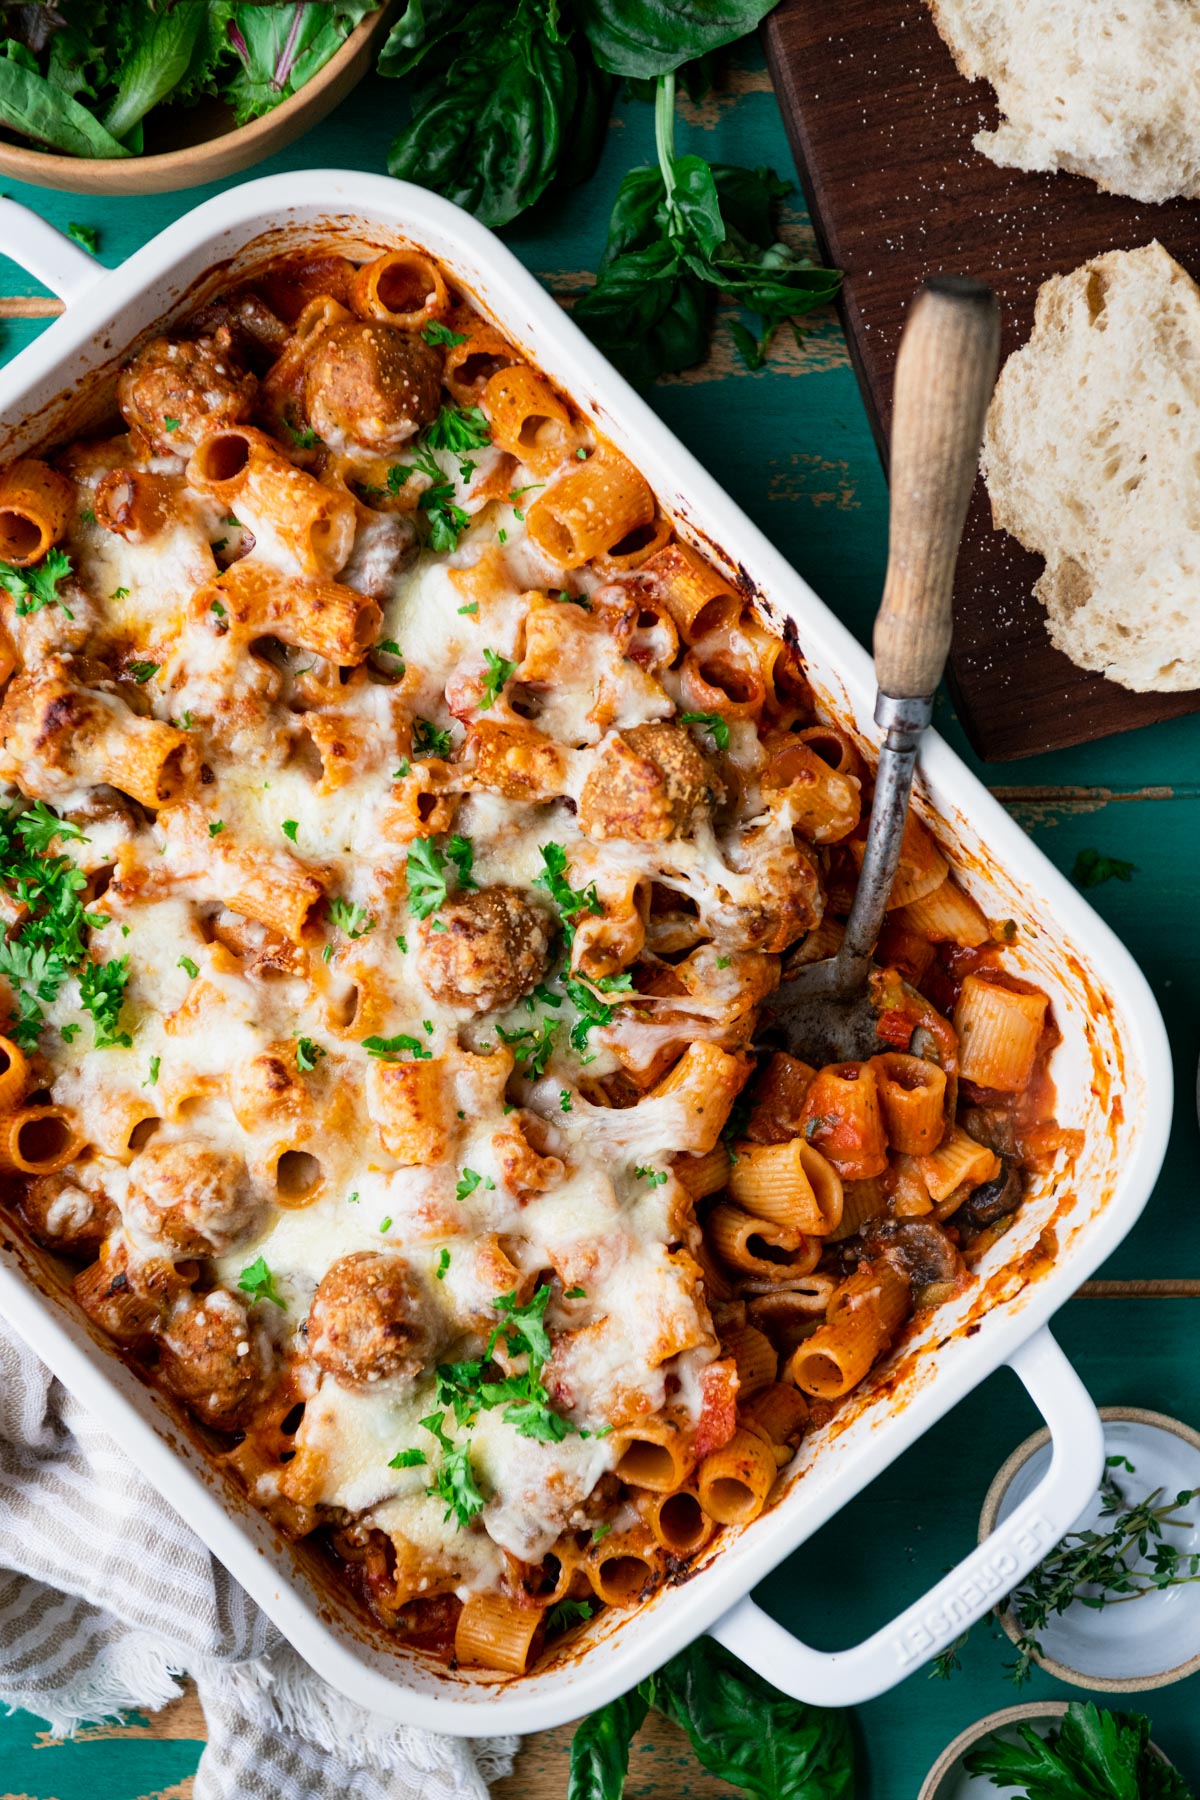 Our 10 Most Popular Casserole Recipes in October